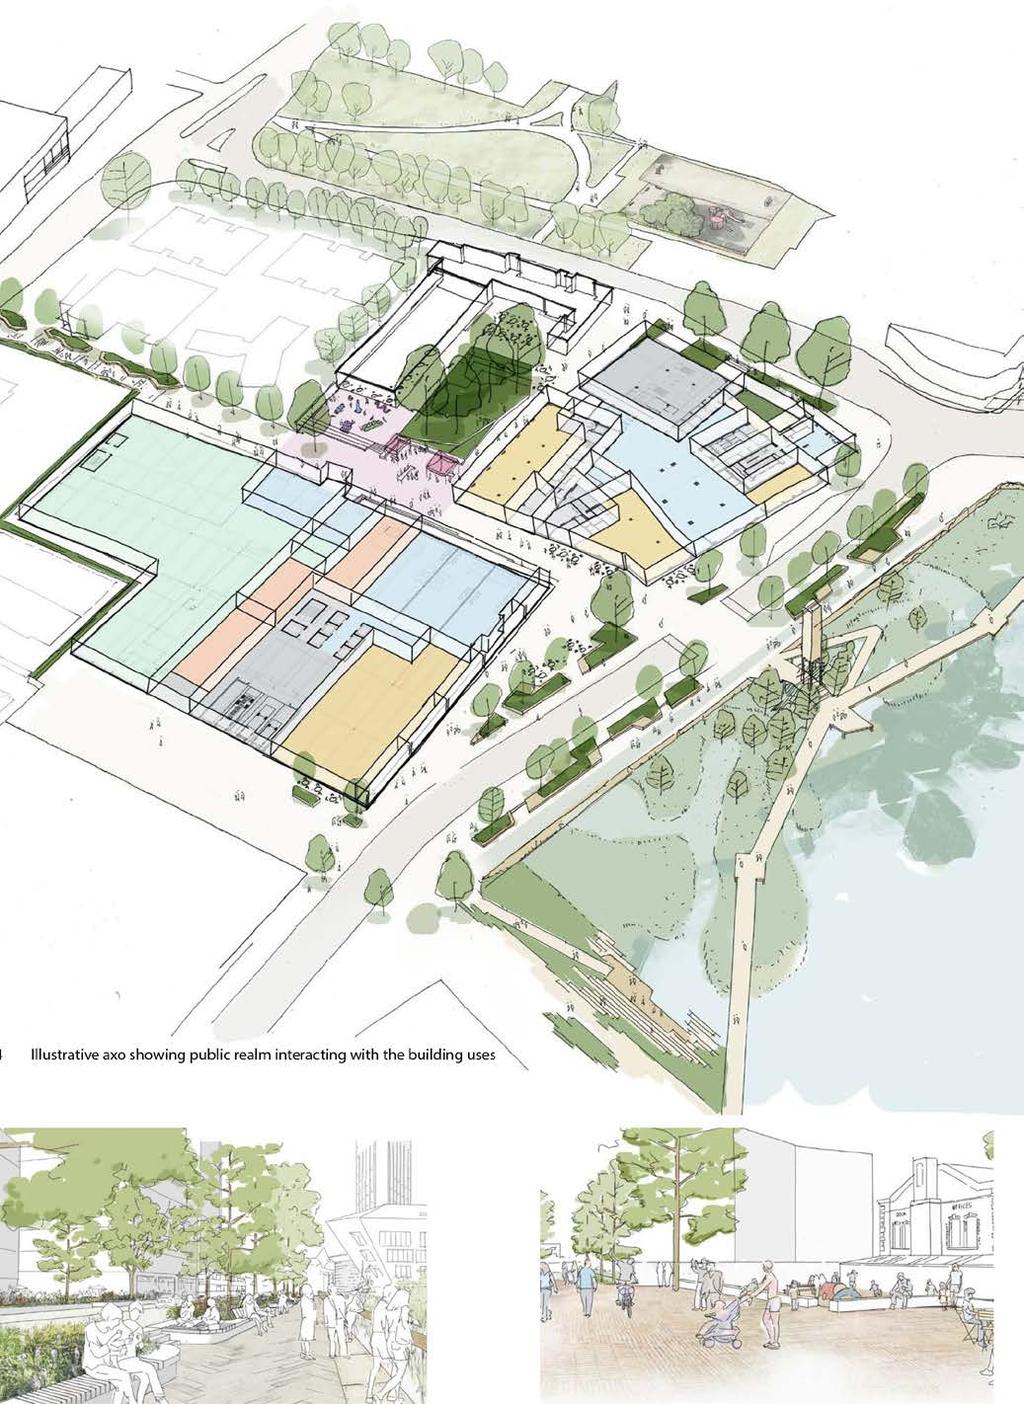 Key Entrances Retail Bike hub Plot A2 Sport / Leisure Plot A2 Back of House PLOT A1 PLOT A2 Illustrative axo showing public realm interacting with the